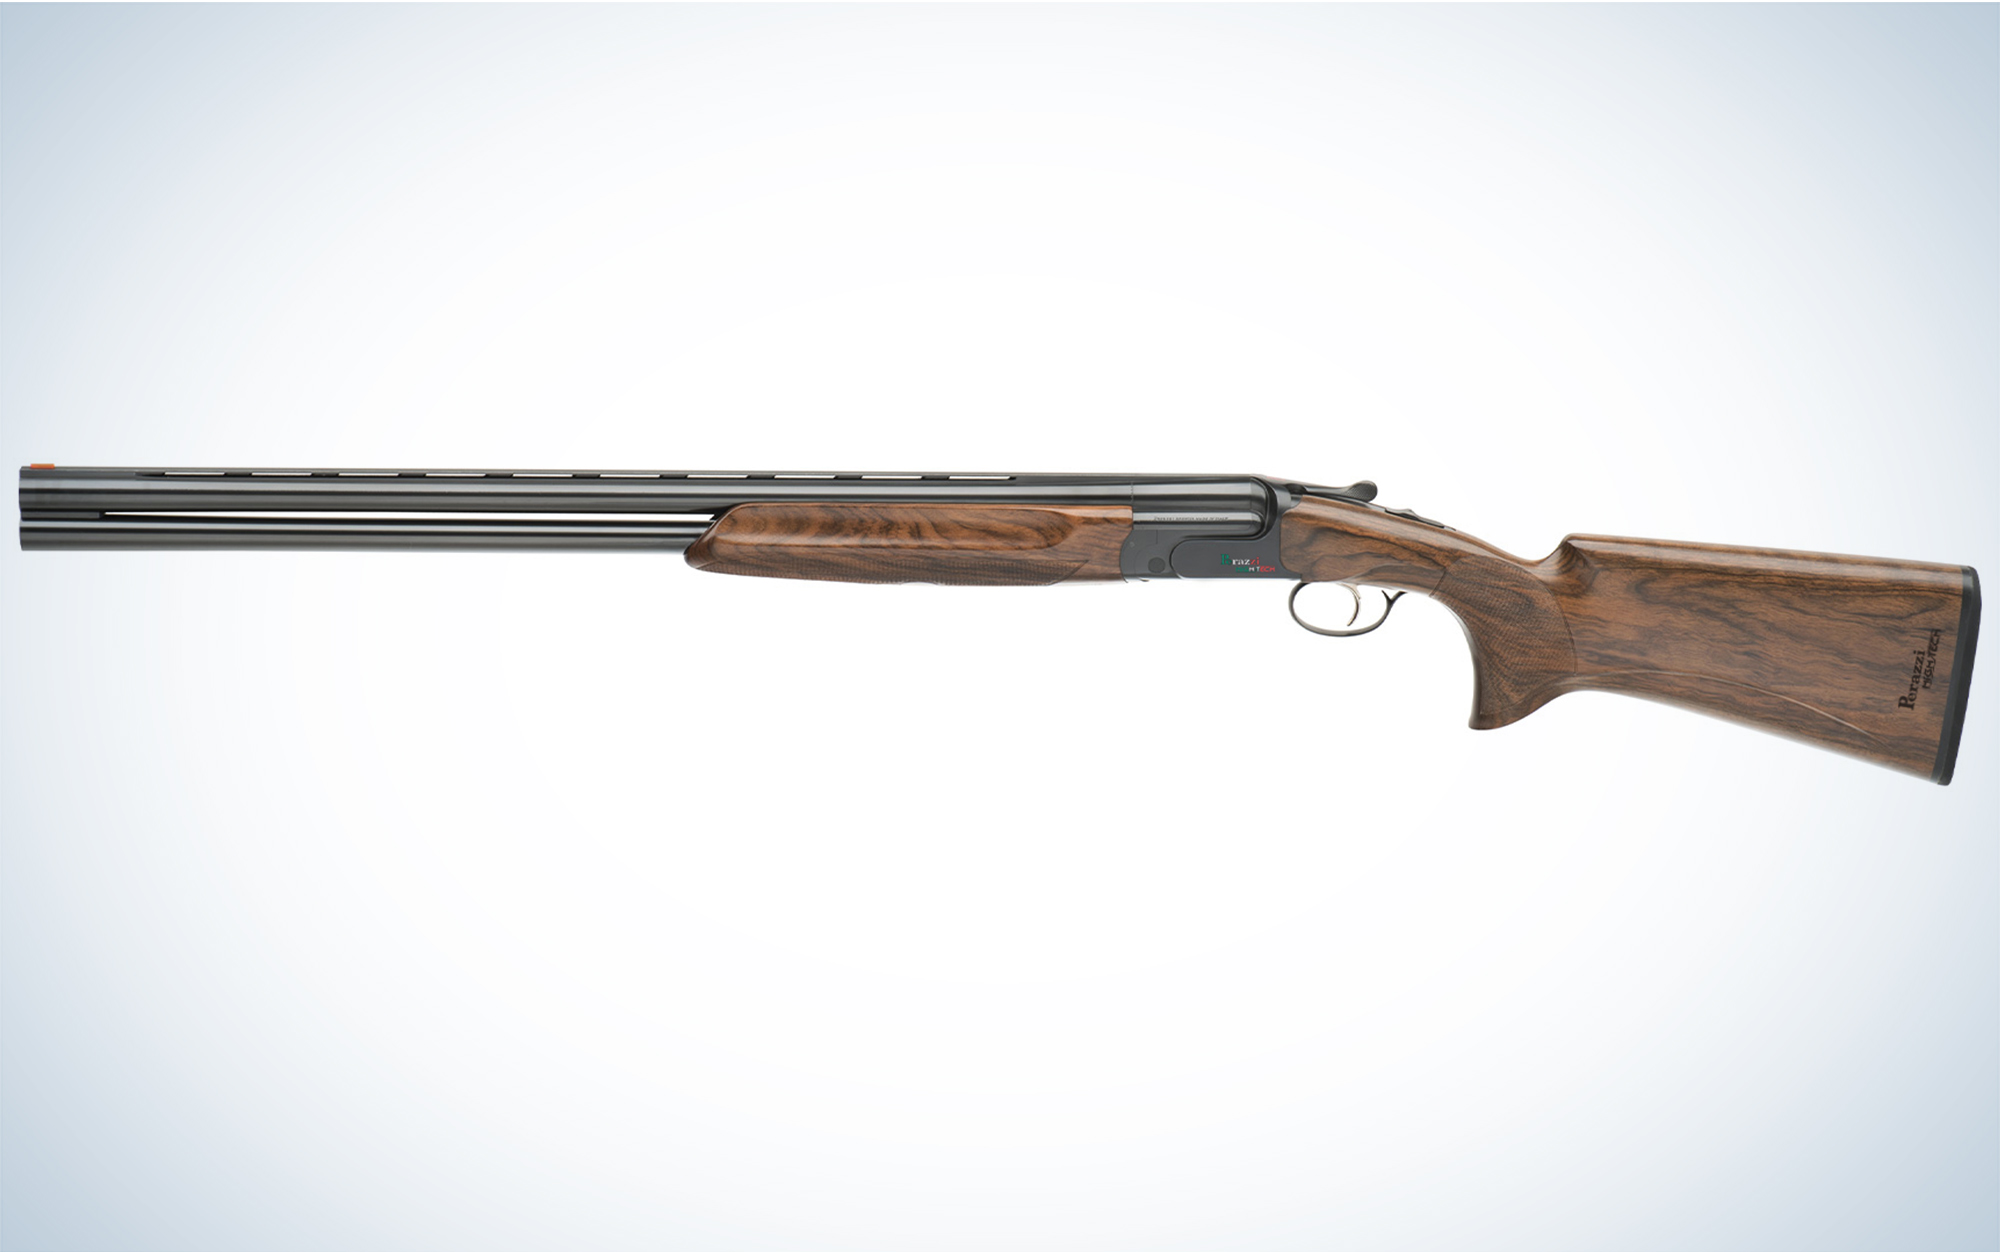 The Perazzi High Tech Skeet is one of the best over/under shotguns.